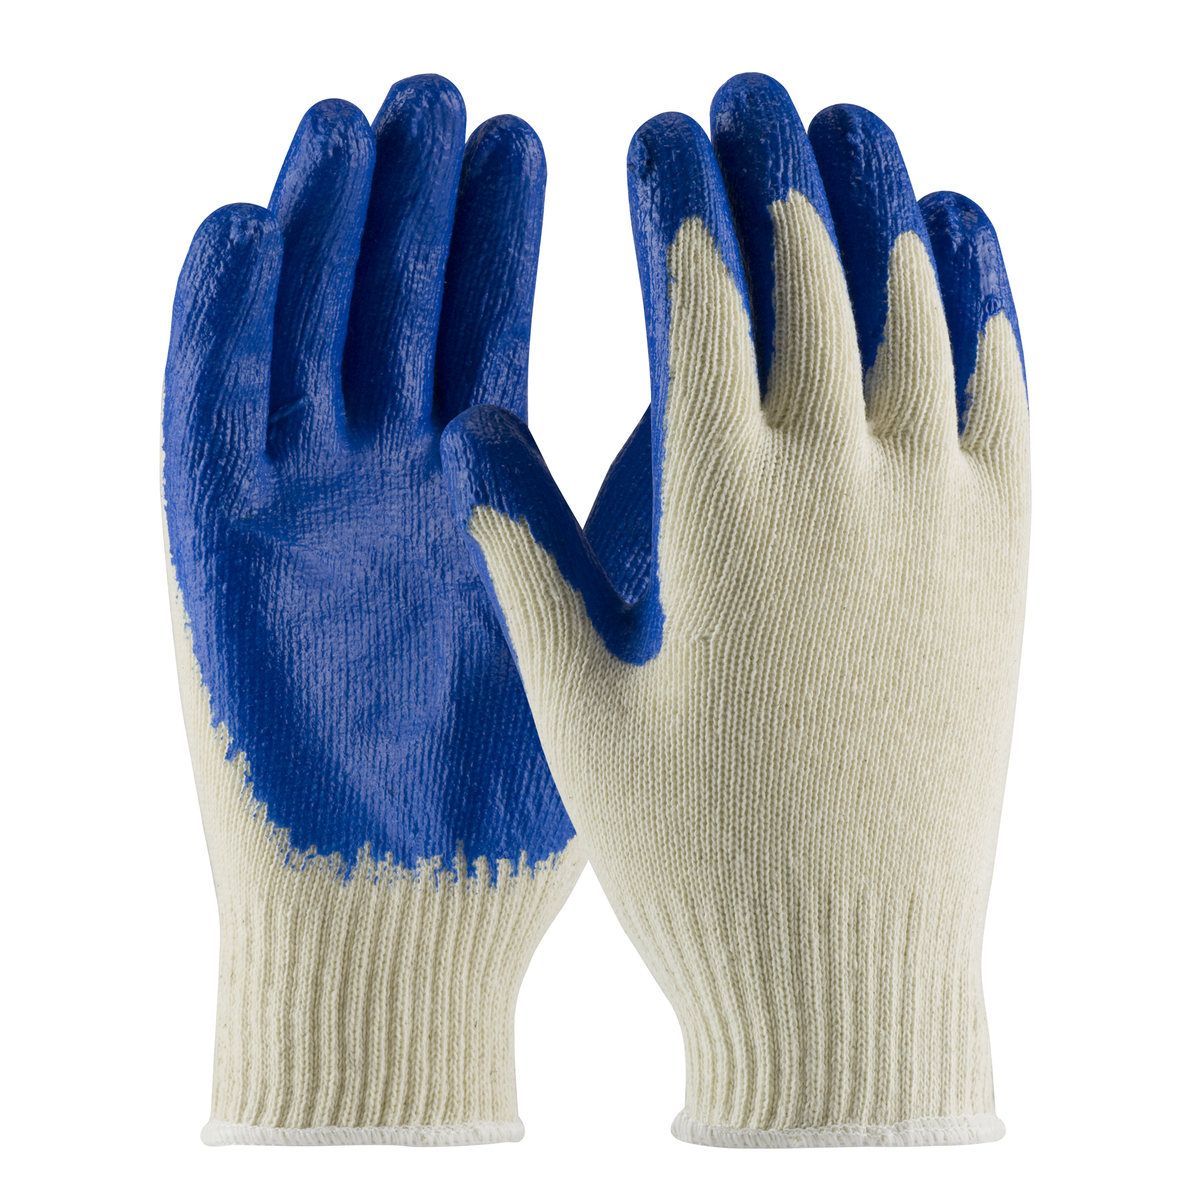 PIP® X-Large  7 Gauge Blue Nitrile Palm And Finger Coated Work Gloves With Cotton Liner And Continuous Knit Wrist